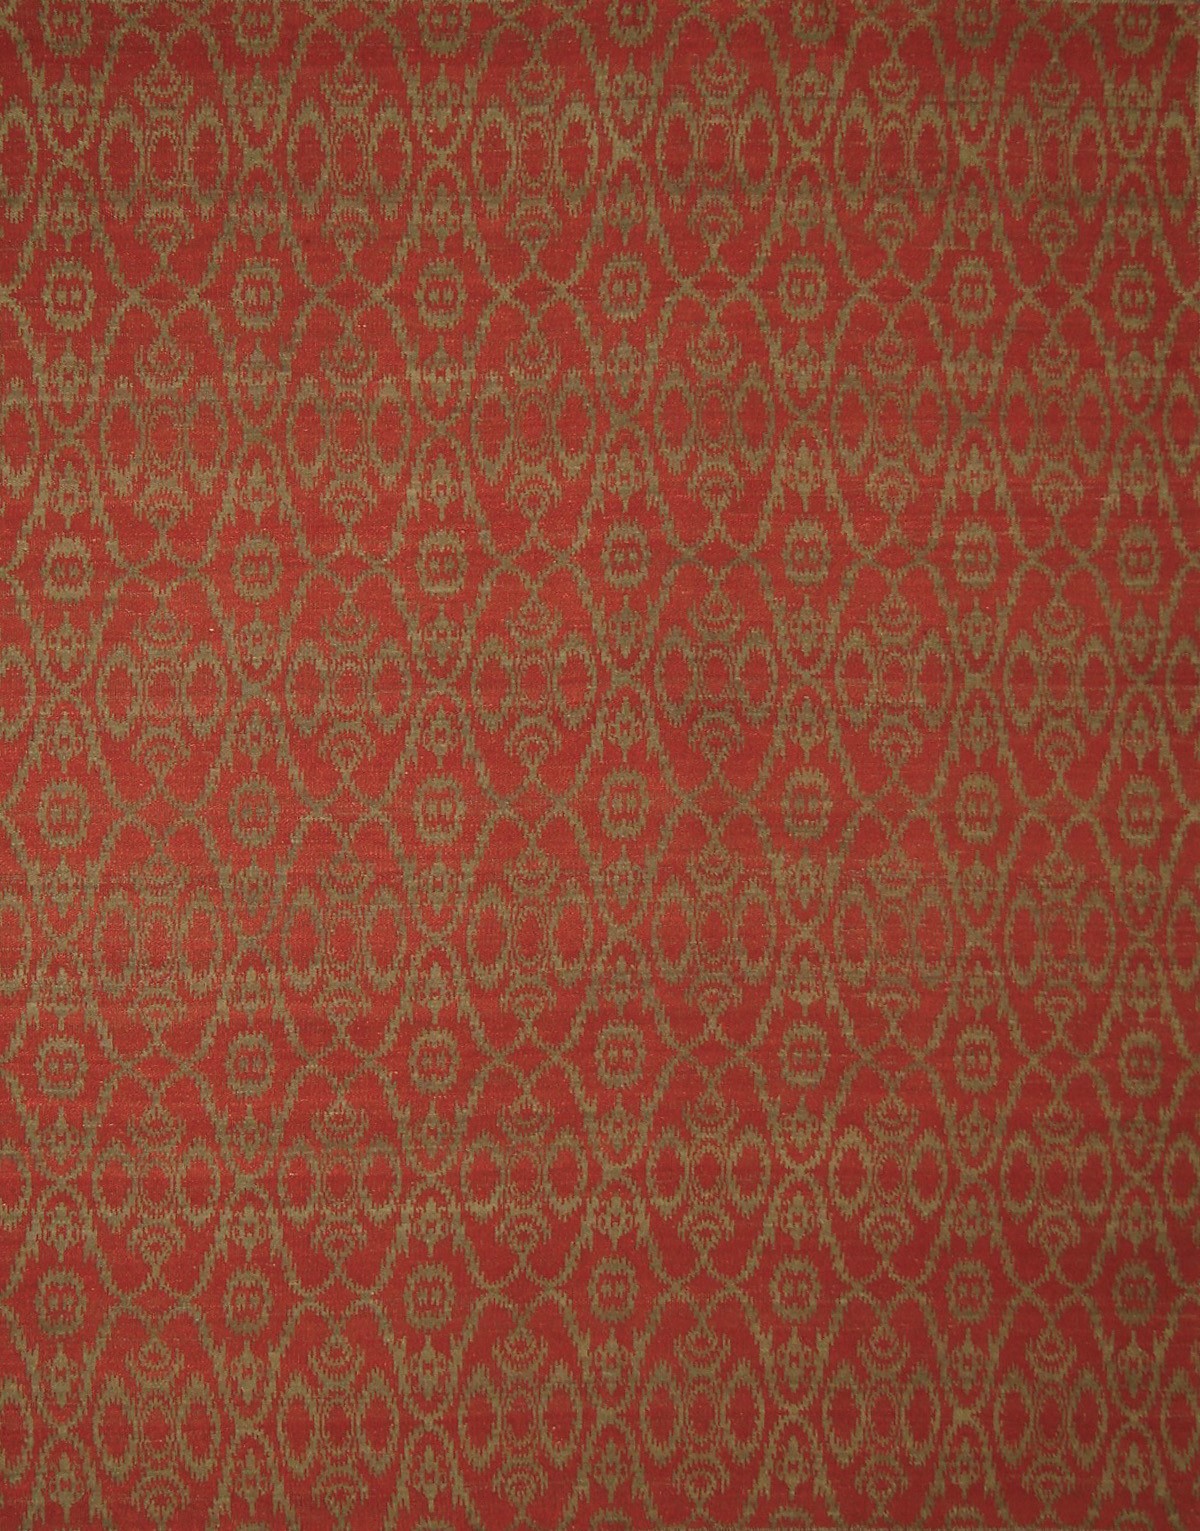 Woven Rugs DH-WV SD-43 Red - Burgundy & Lt. Brown - Chocolate Flat weave Rug